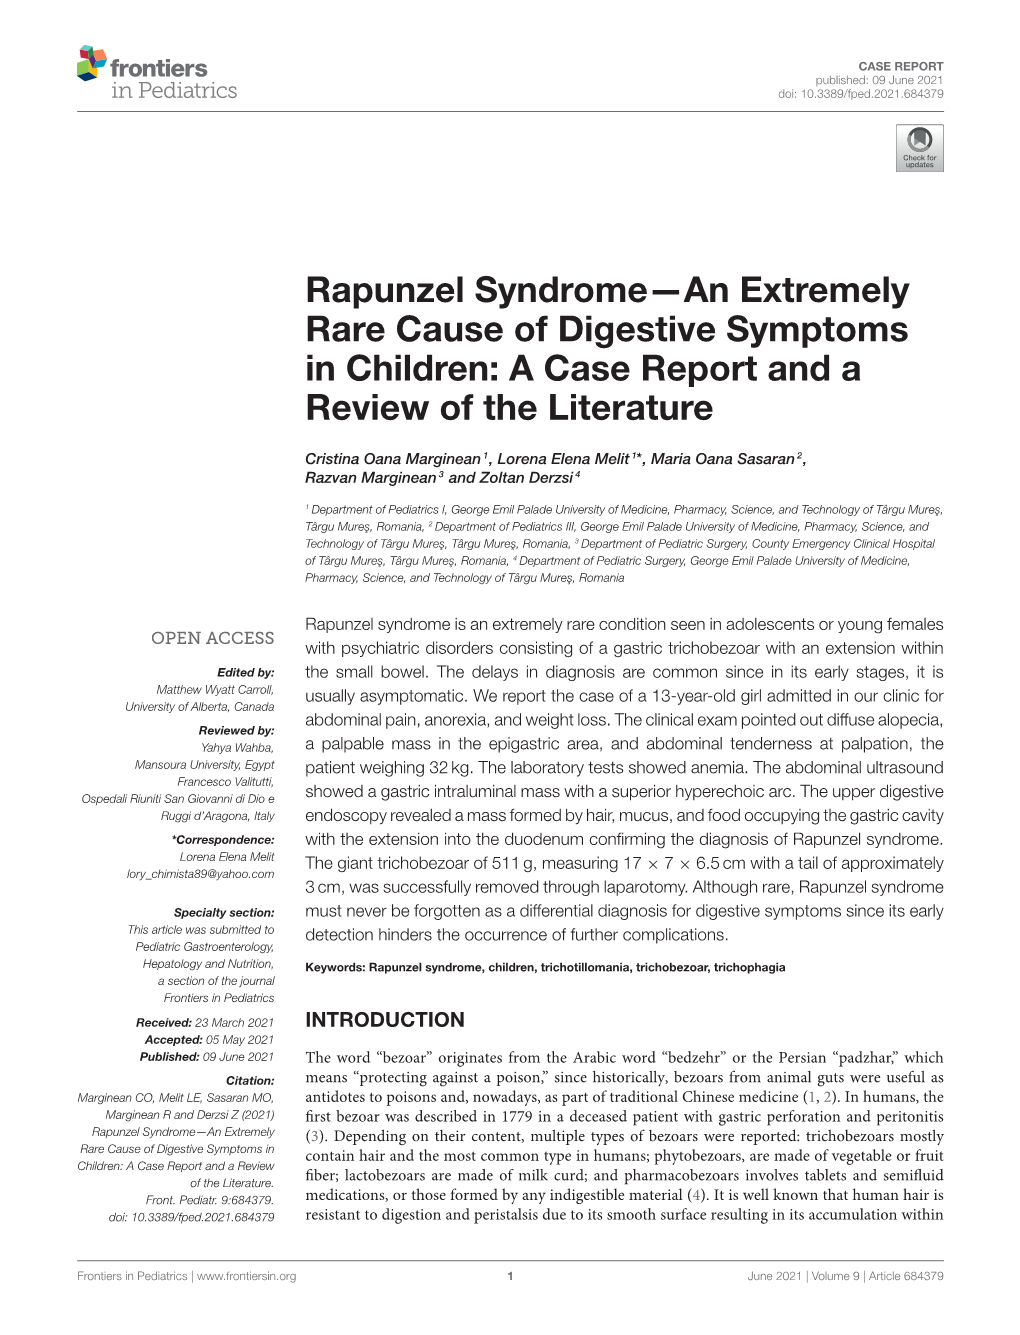 Rapunzel Syndrome—An Extremely Rare Cause of Digestive Symptoms in Children: a Case Report and a Review of the Literature